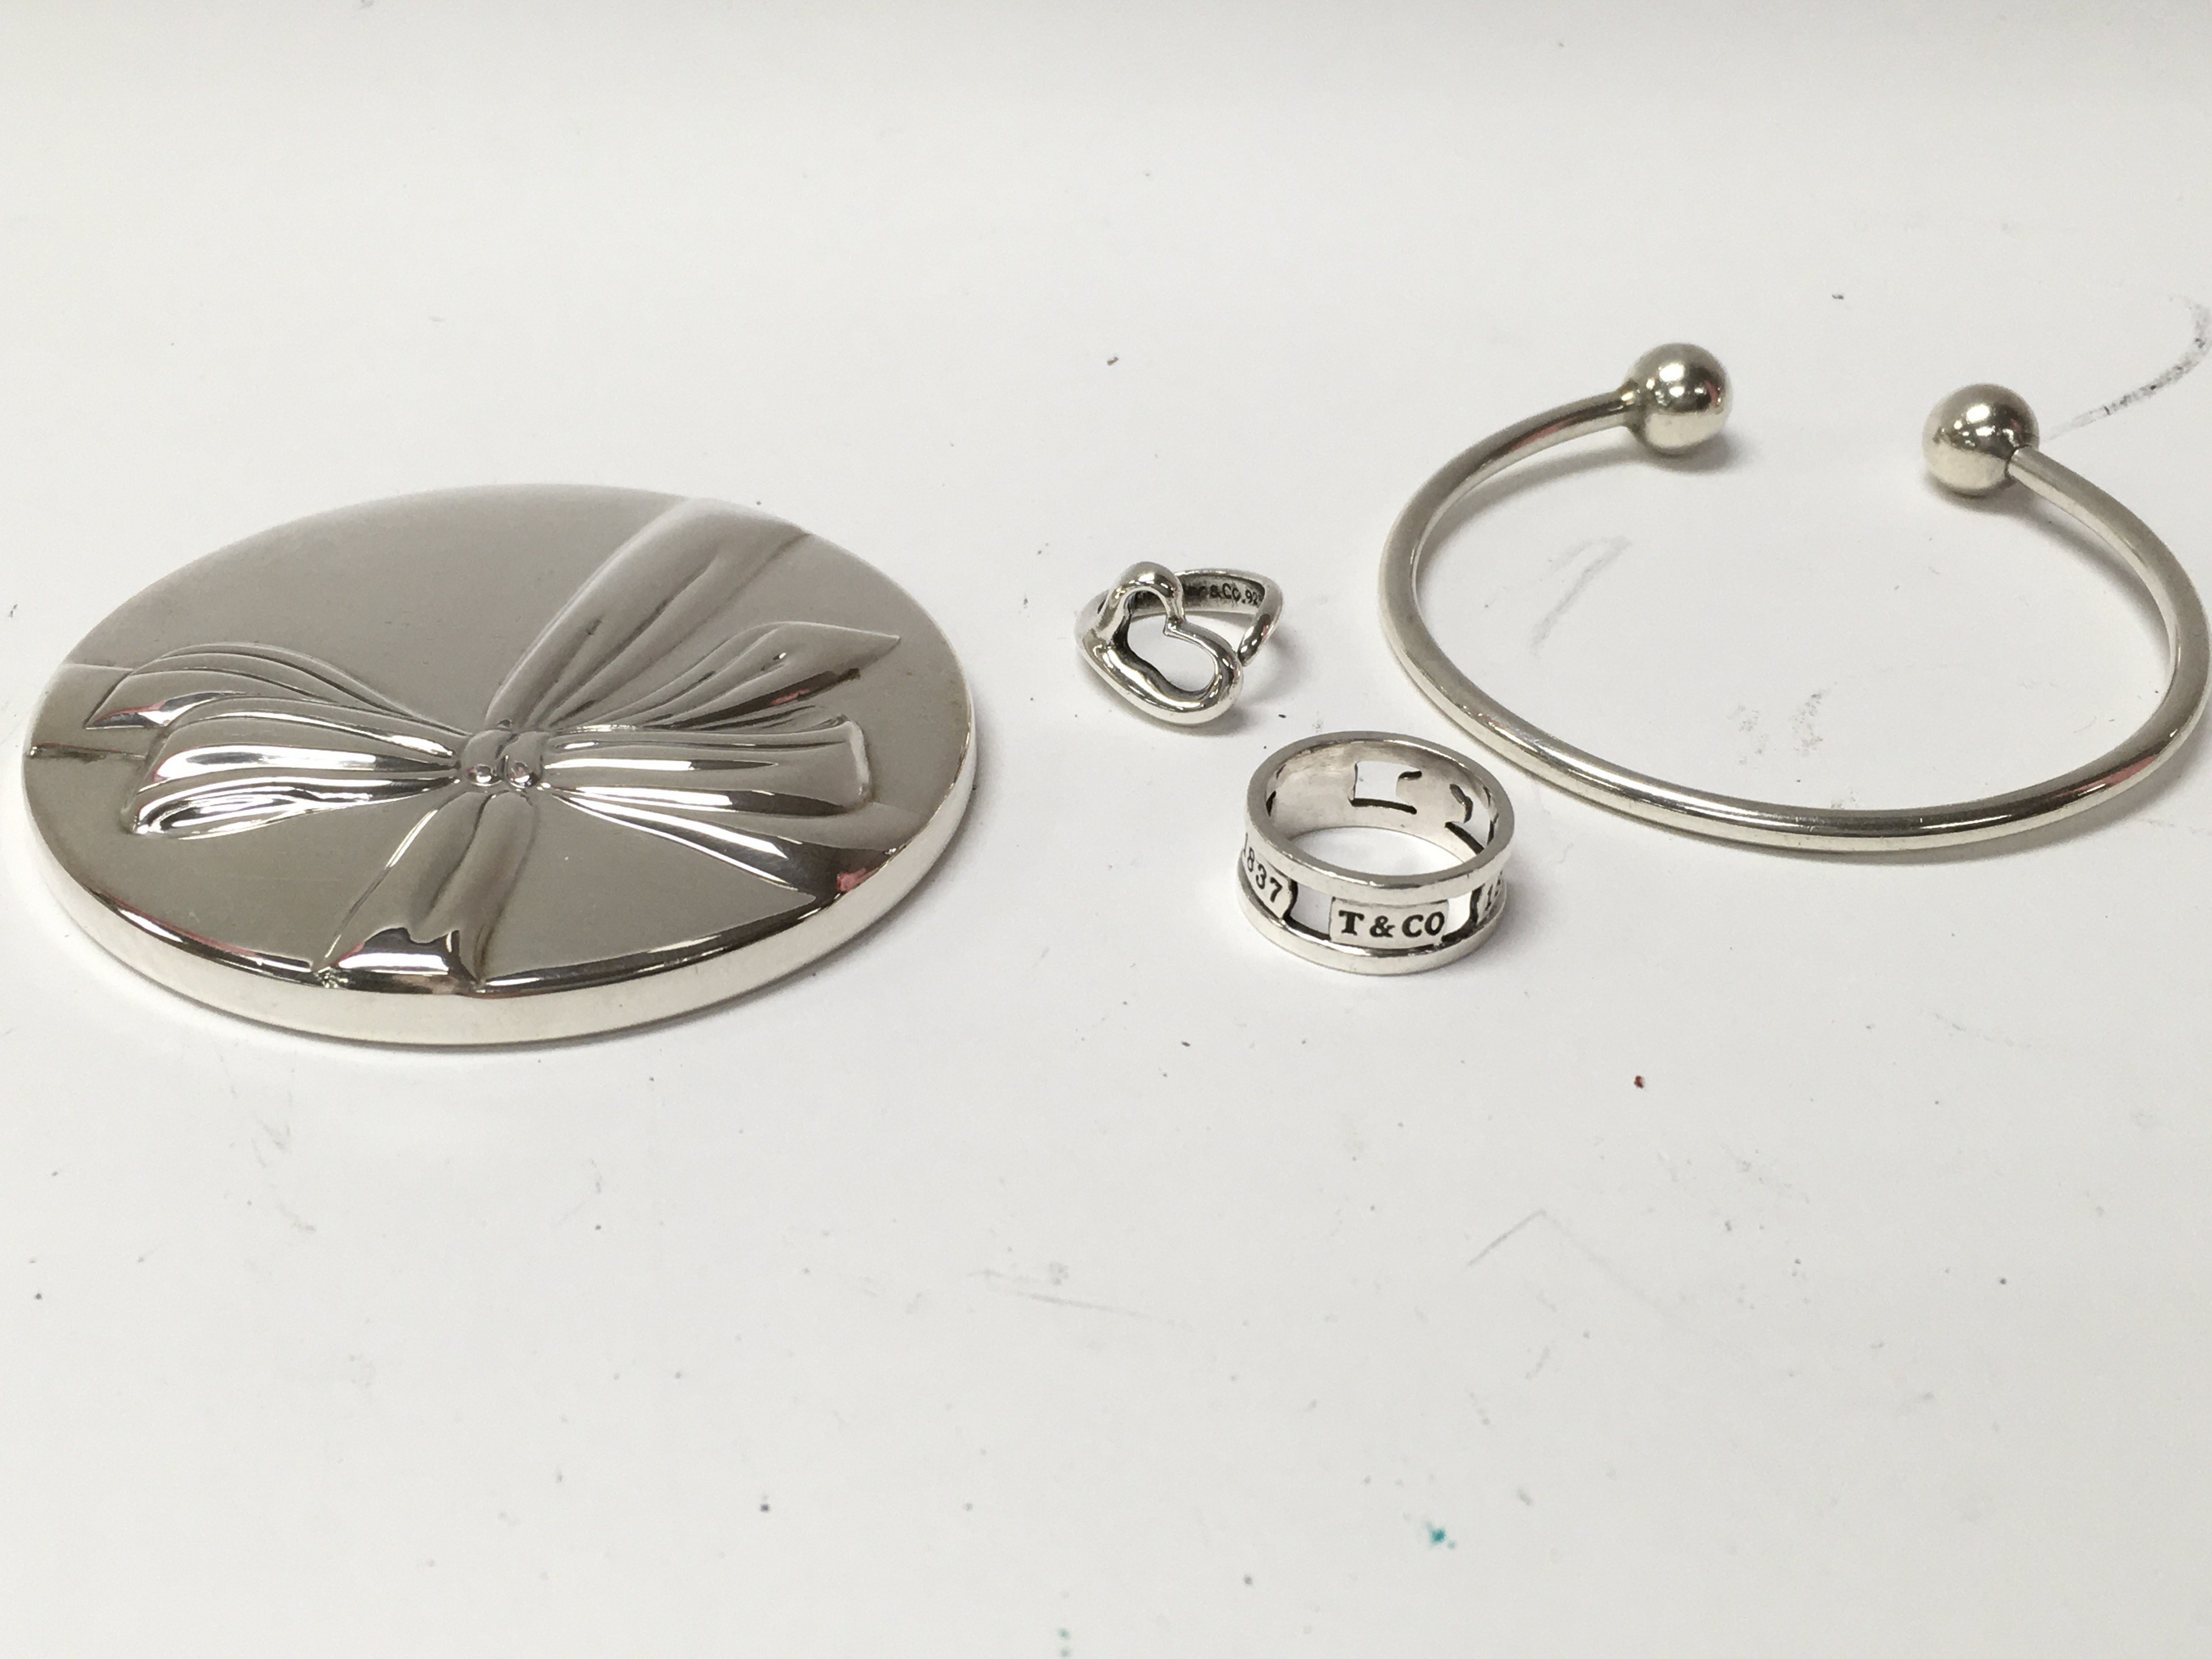 A Tiffany and Co silver bangle with unscrewing end